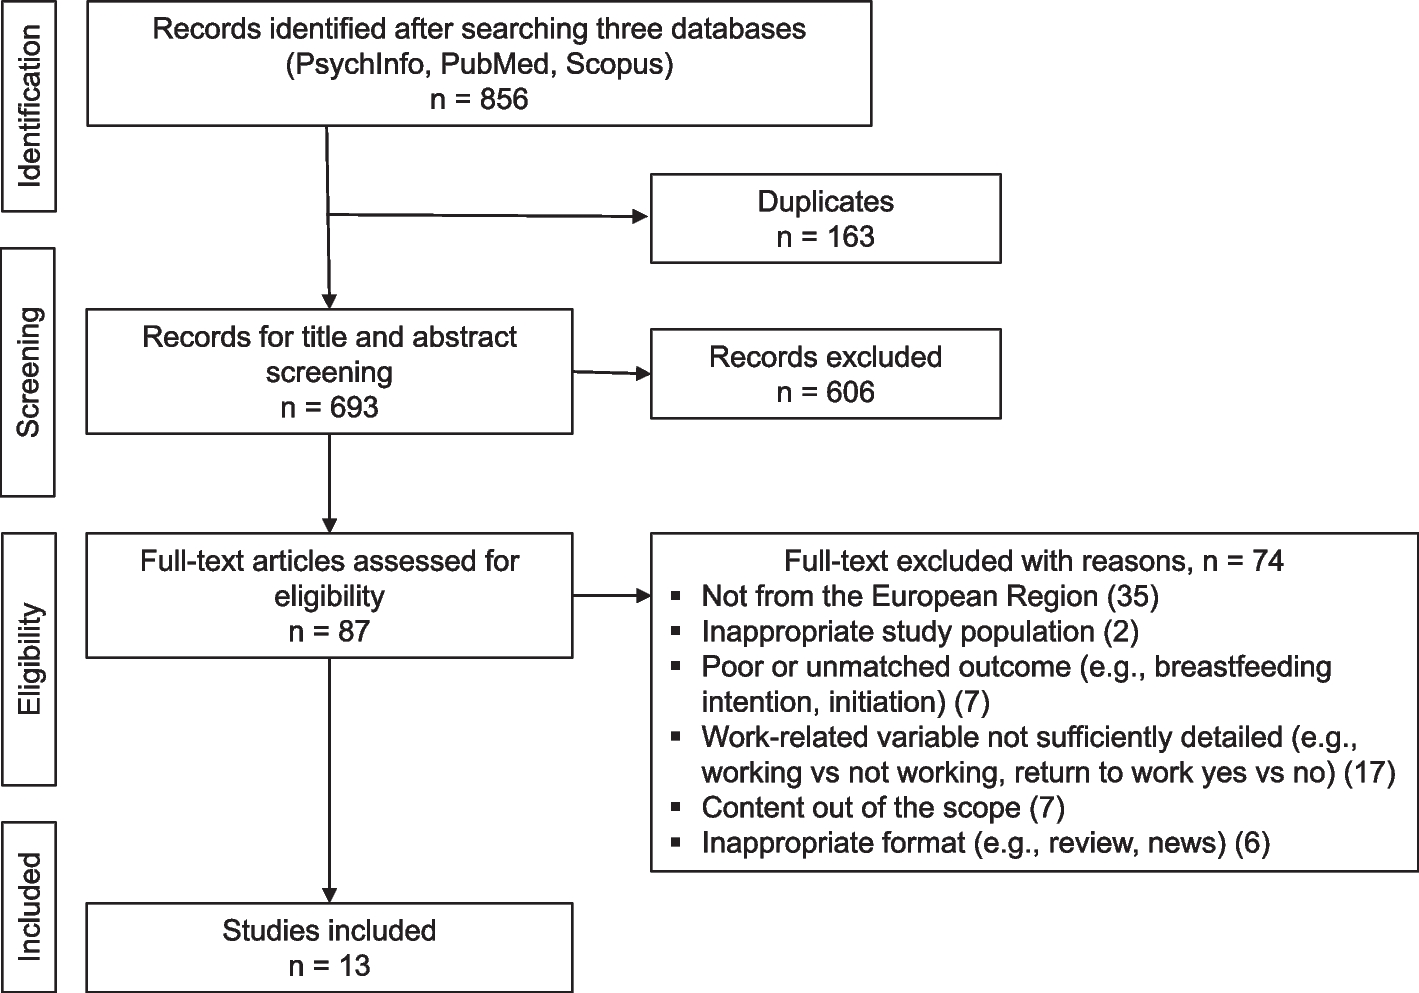 Maternal employment characteristics as a structural social determinant of breastfeeding after return to work in the European Region: a scoping review